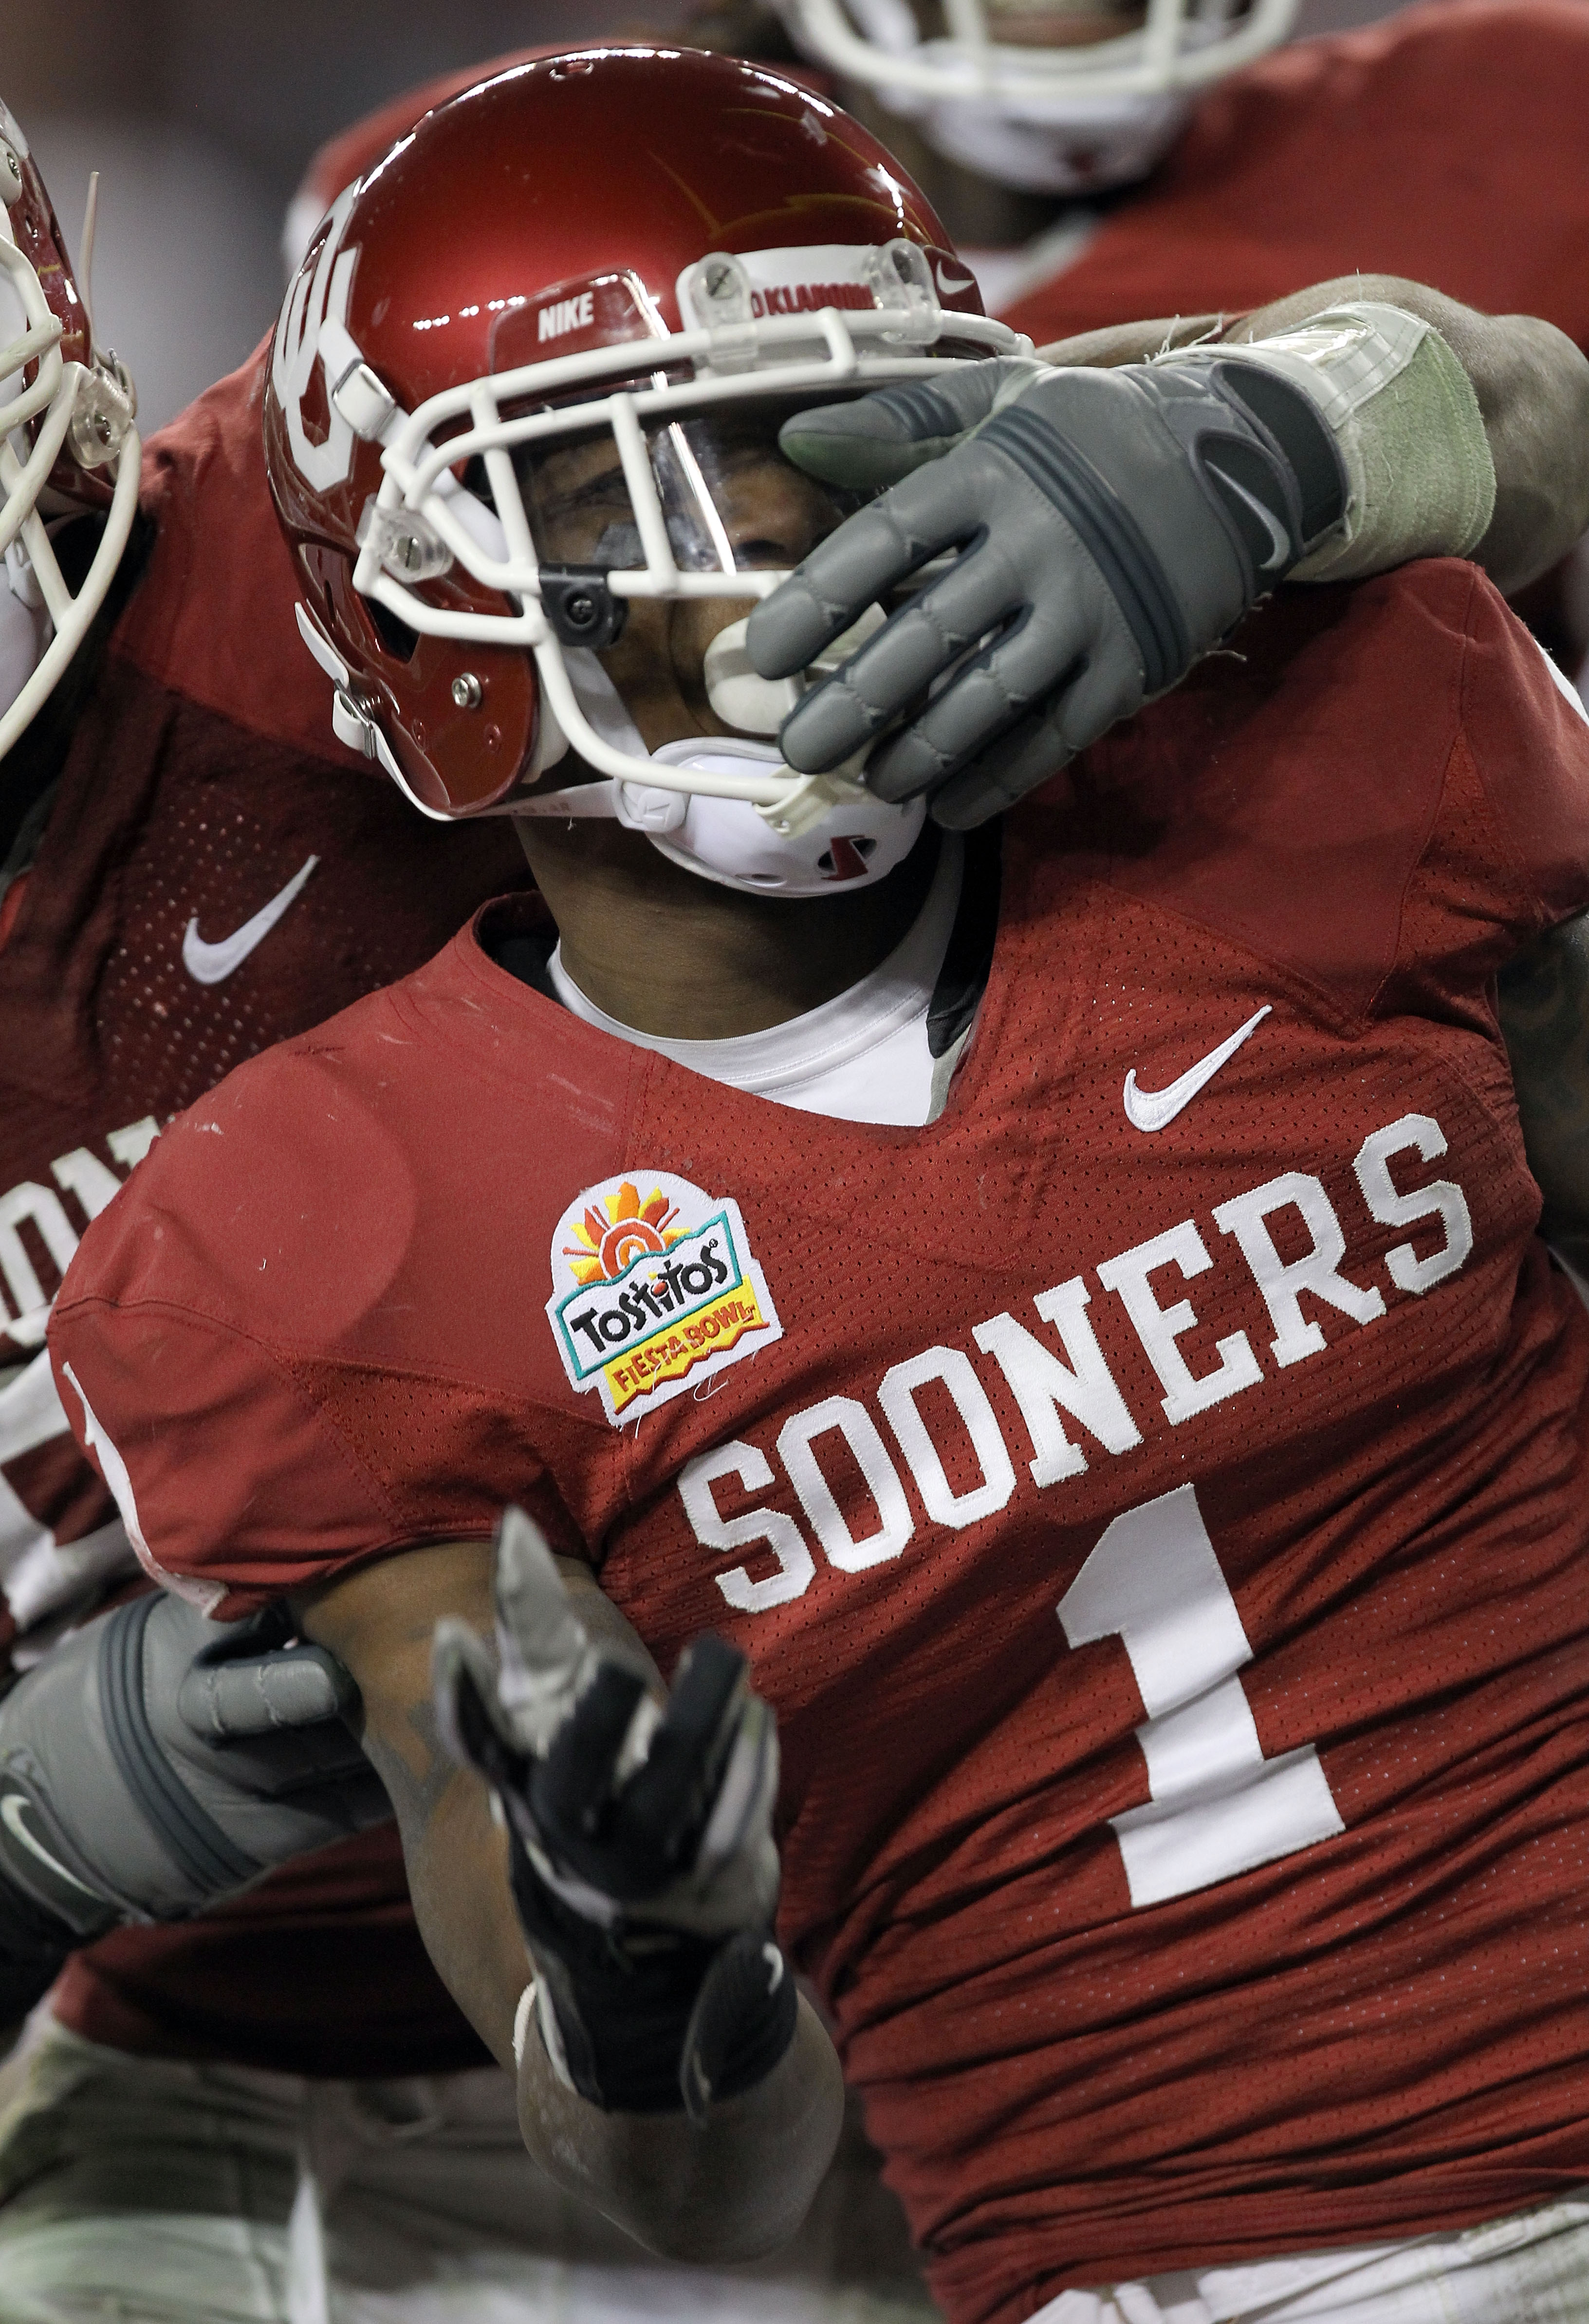 GLENDALE, AZ - JANUARY 01:  Tony Jefferson #1 of the Oklahoma Sooners reacts while taking on the Connecticut Huskies during the Tostitos Fiesta Bowl at the Universtity of Phoenix Stadium on January 1, 2011 in Glendale, Arizona.  (Photo by Ronald Martinez/